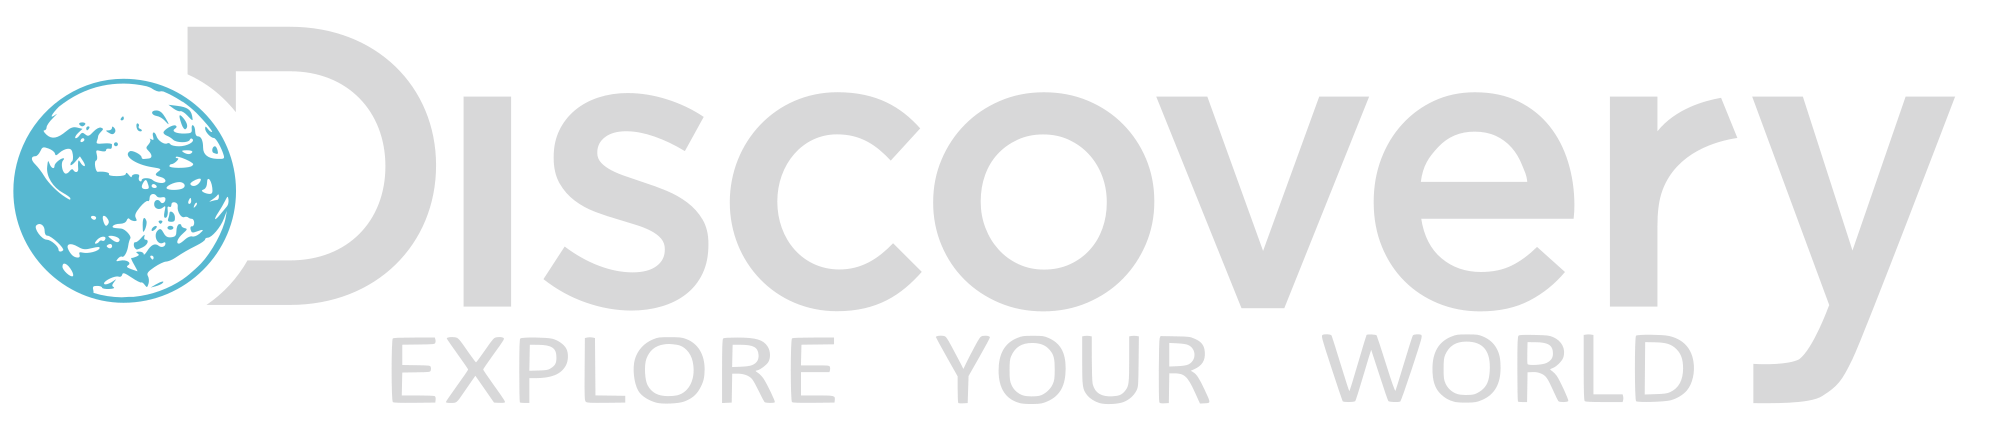 Discovery Communications Logo - Discovery Communications logo color.svg